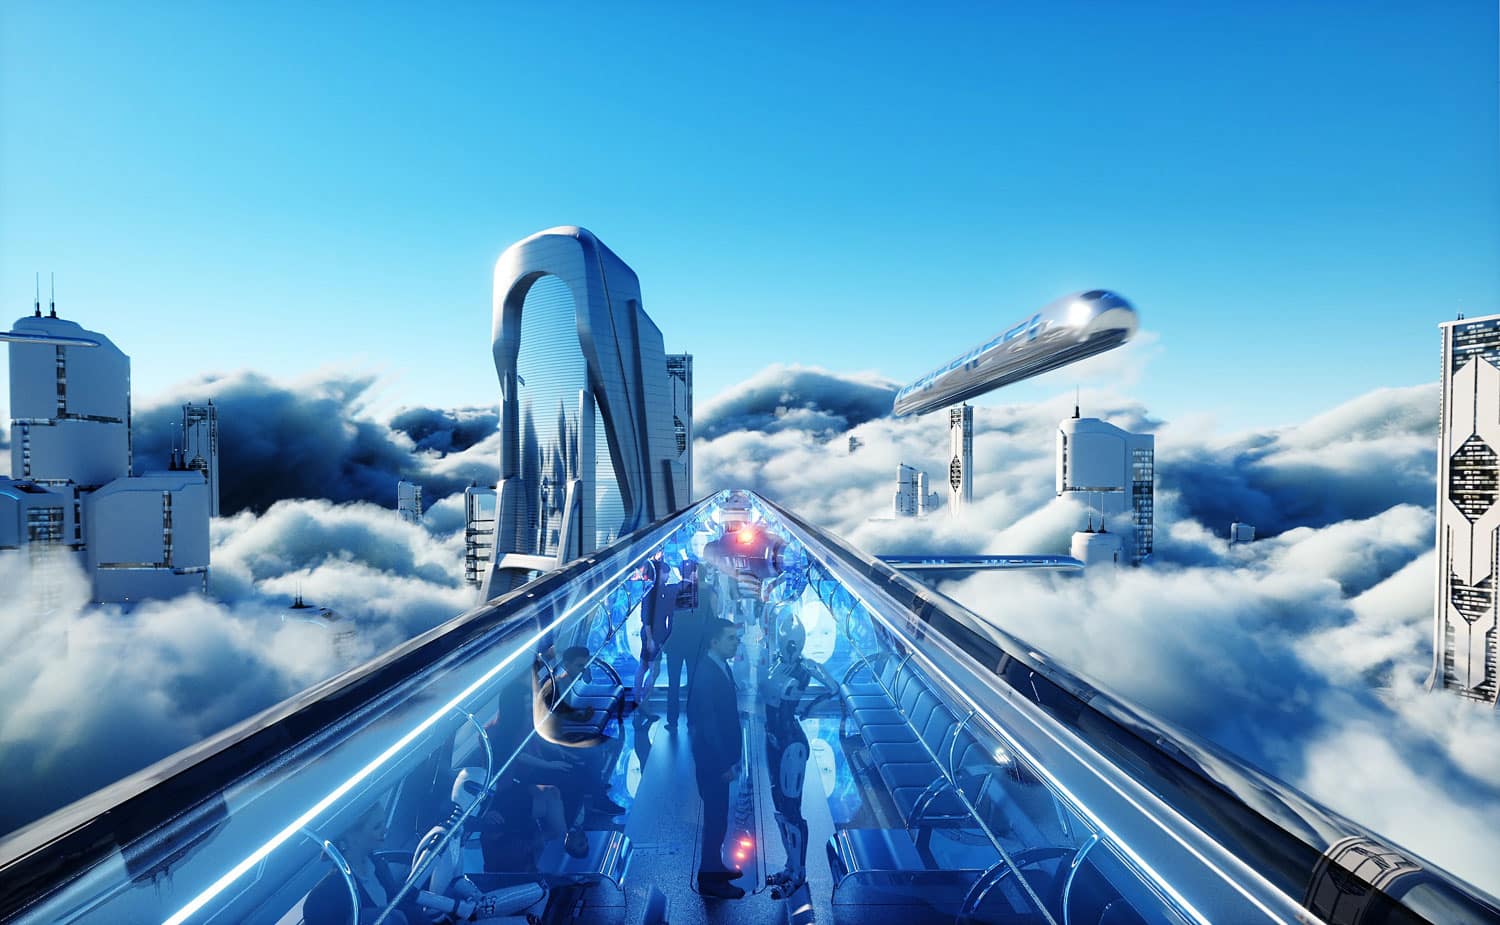 Futuristic looking city with flying vehicles